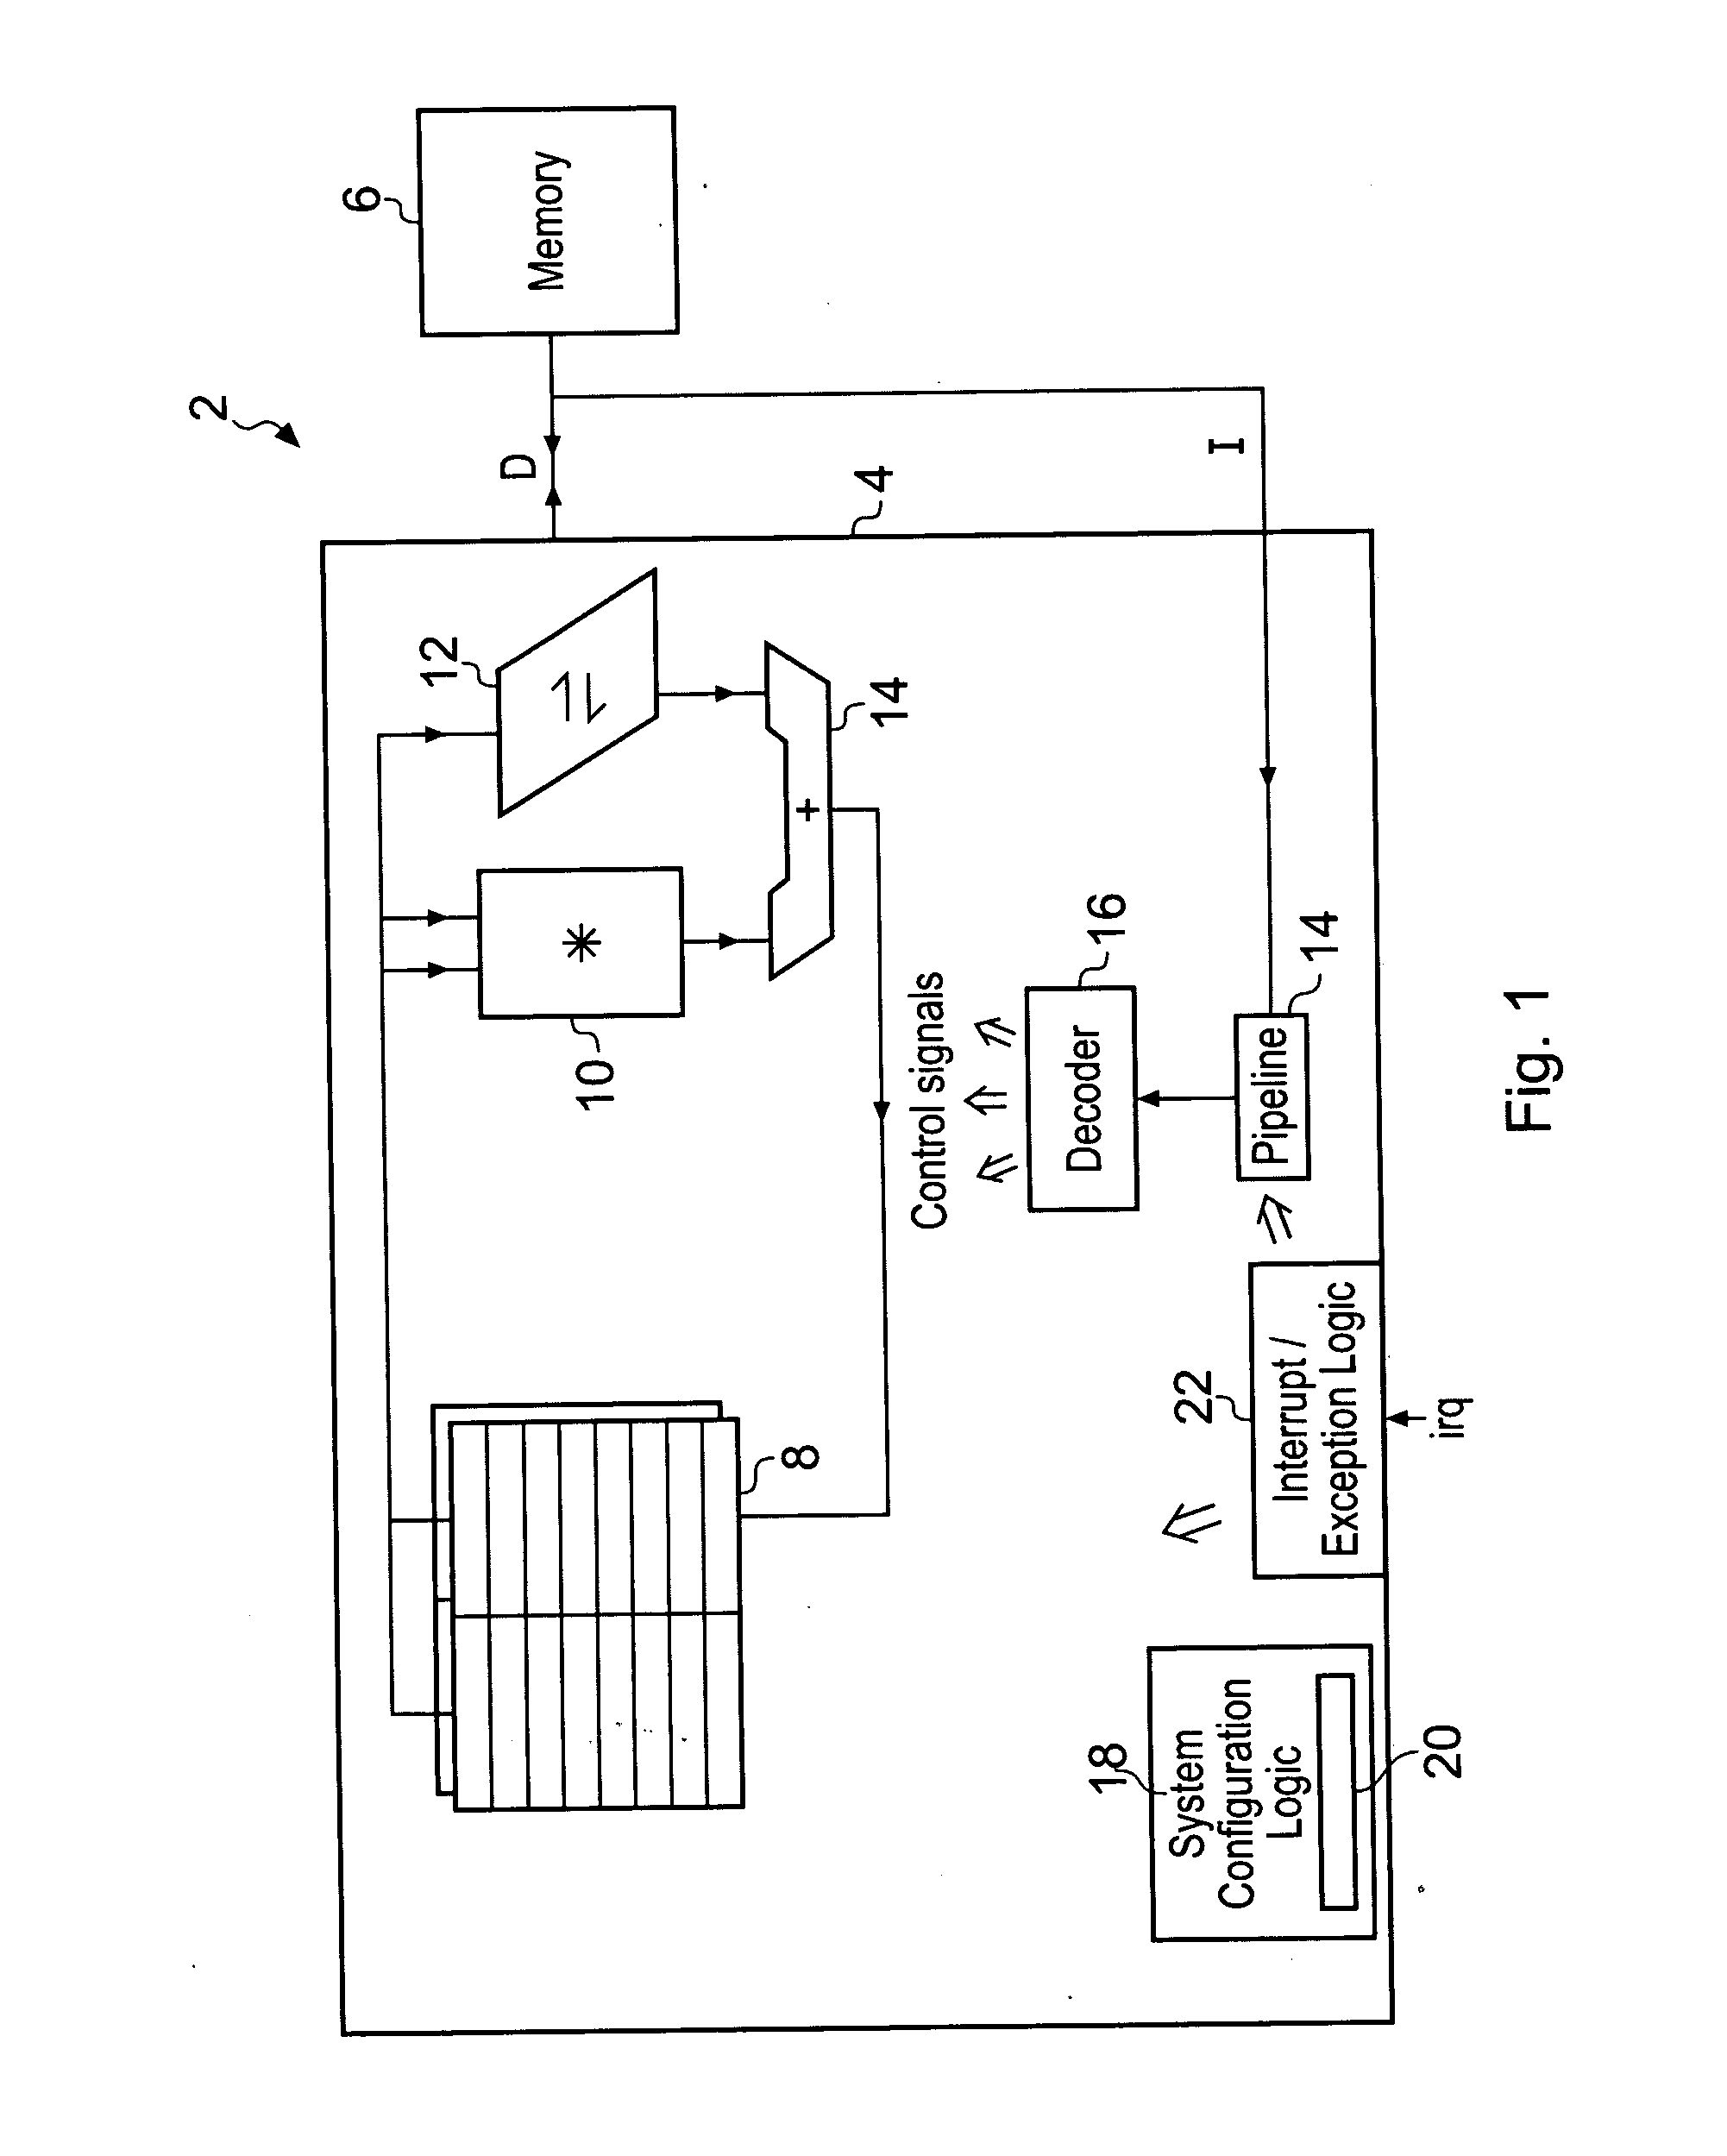 Stack memory selection upon exception in a data processing system